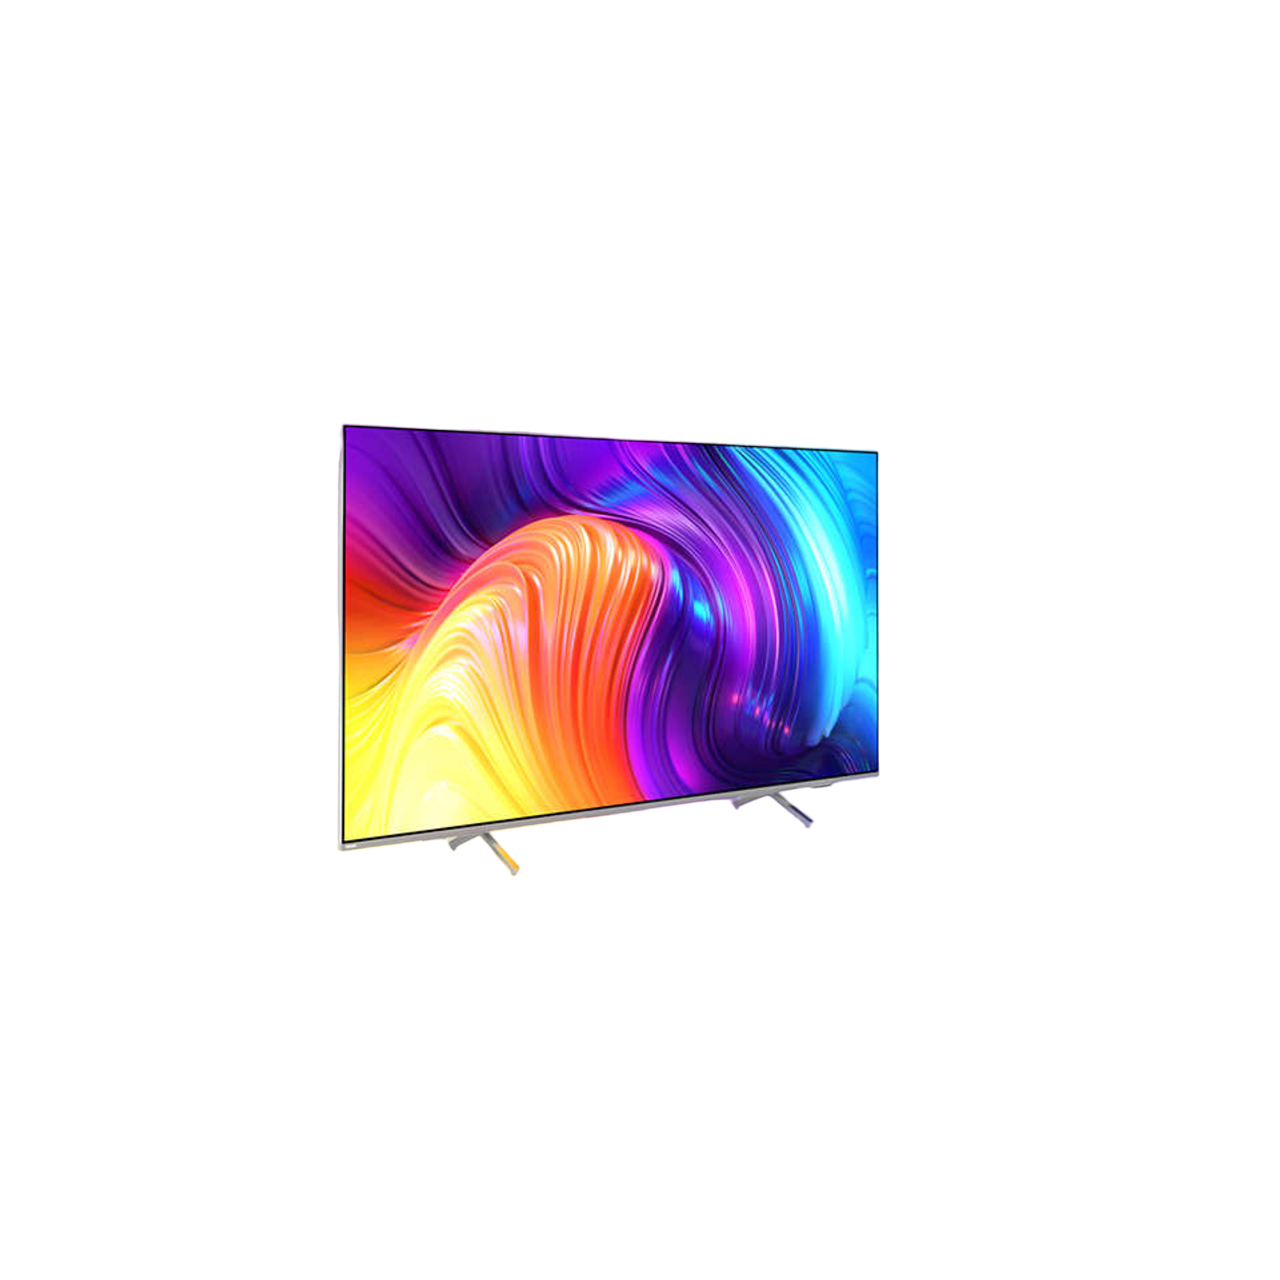 PUS LED 109,22 43 / 11 (Flat, UHD PHILIPS TV cm, 4K, 43 8507/12 Zoll (R)) TV™ Ambilight, Android